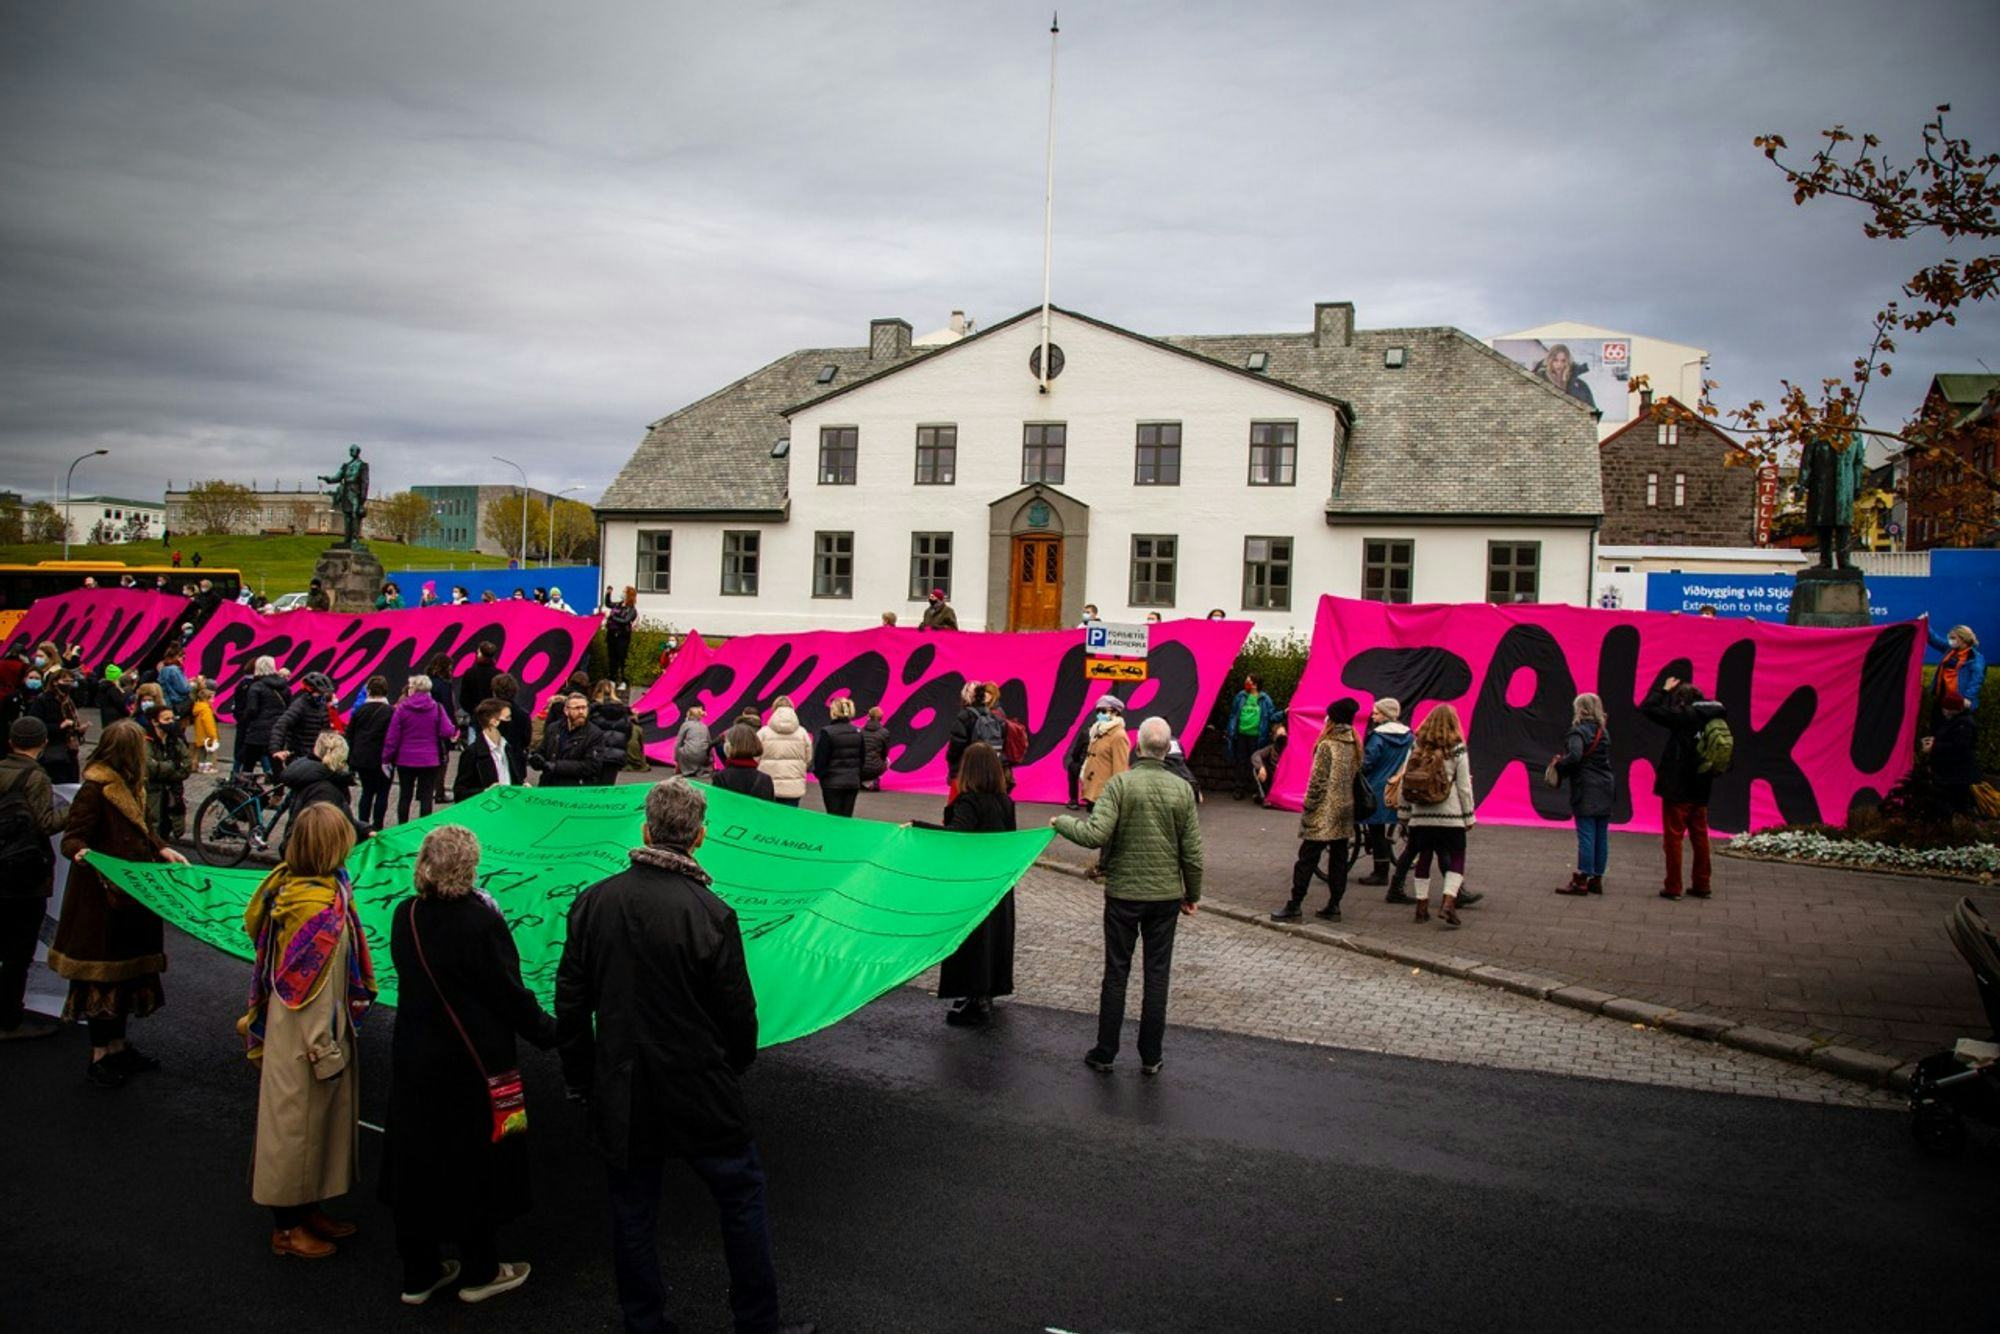 Magic Team In Search of Magic – A Proposal for a New Constitution for The Republic of Iceland. Photo: Owen Fiene